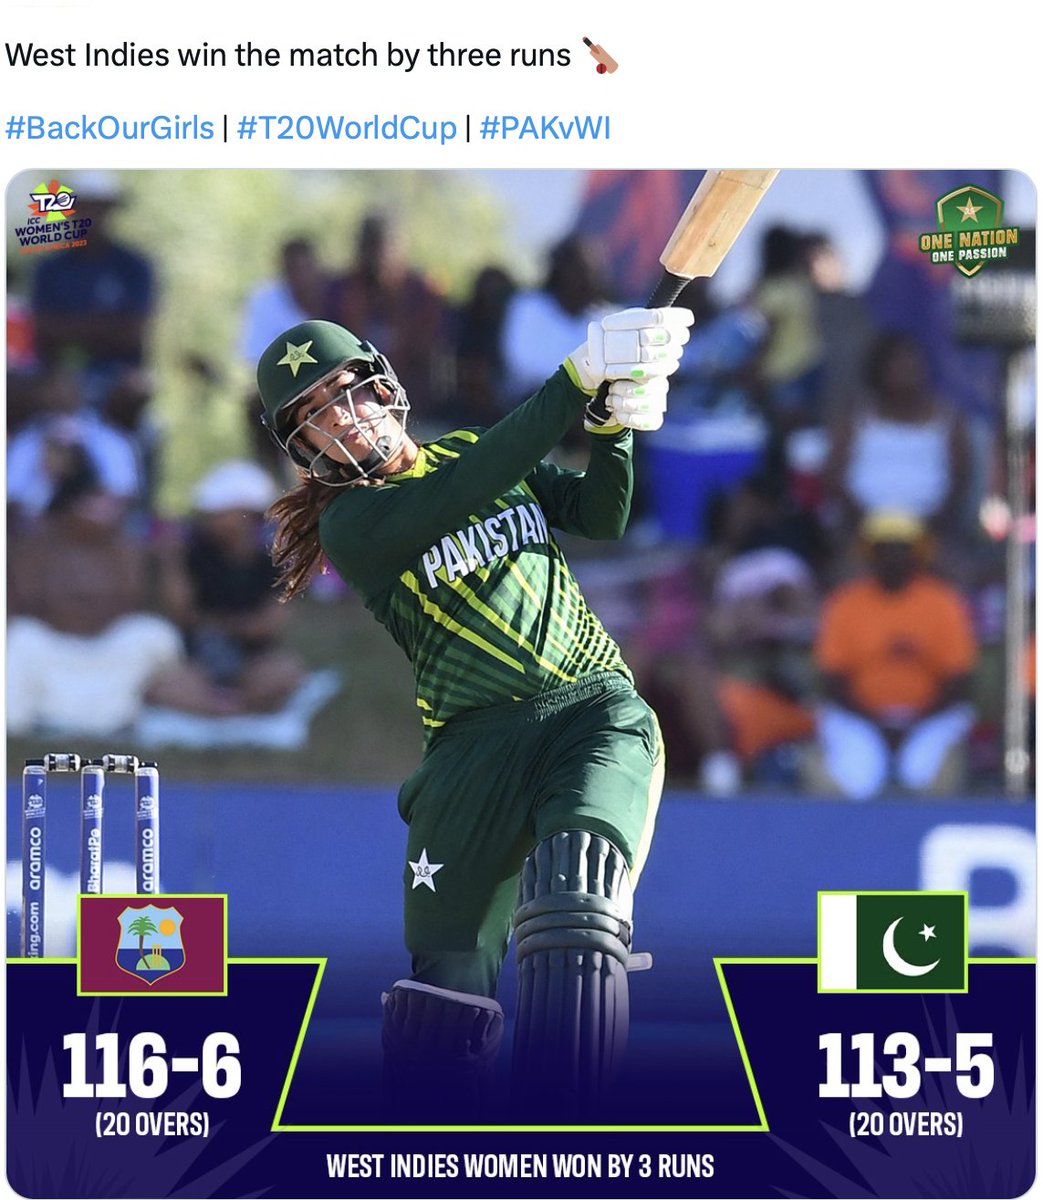 Maaza    ayya  ? Can't even chase  116 in 20 overs  , giving away  10 runs  in 1  over  while bowling . Flight  tickets for  Karachi are  waiting 
😂😂😂😂😂😂
#PakVsWI
#T20WorldCup2023